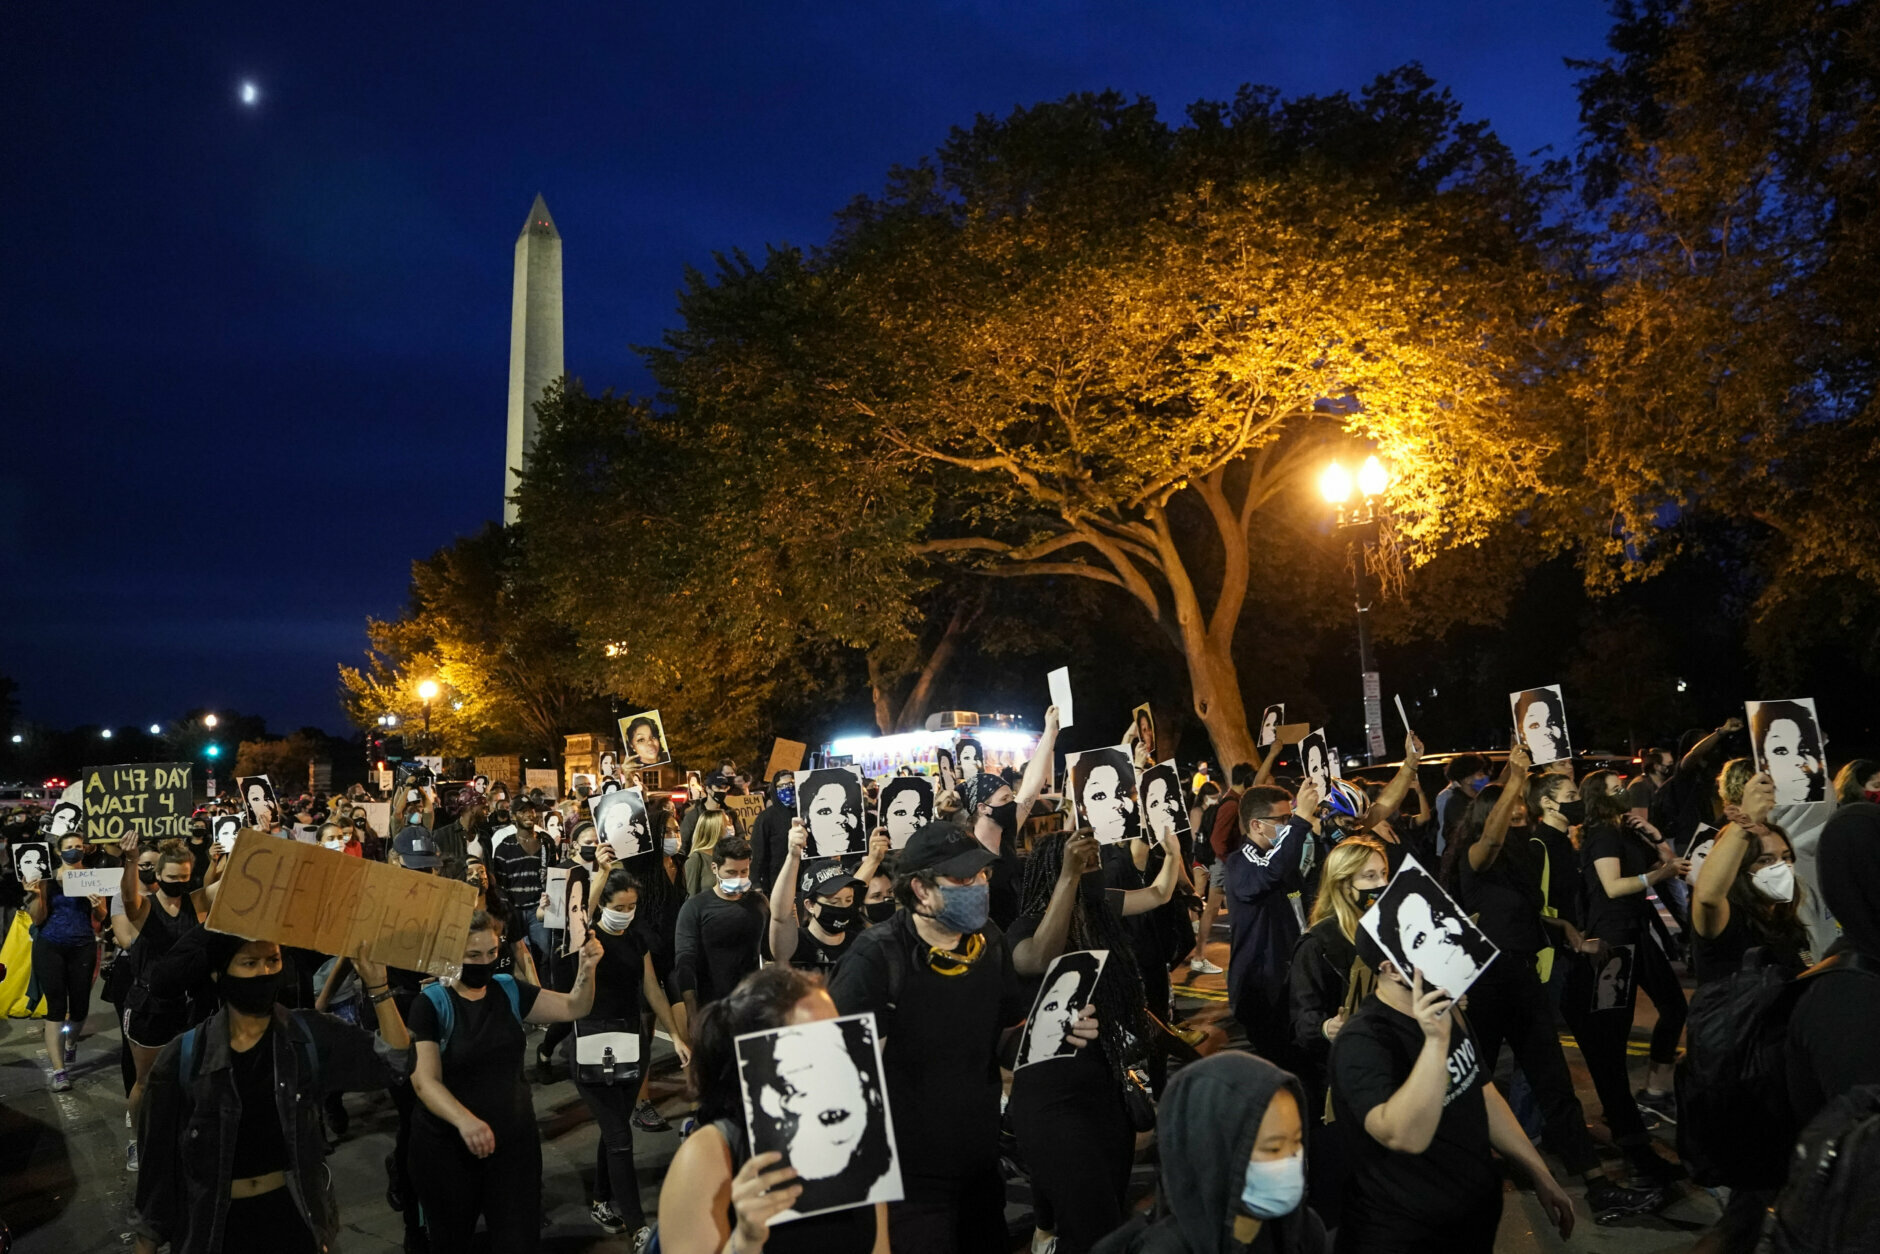 WASHINGTON, DC - SEPTEMBER 23: Demonstrators march near the White House in protest following a Kentucky grand jury decision in the Breonna Taylor case on September 23, 2020 in Washington, DC. A Kentucky grand jury indicted one police officer involved in the shooting of Breonna Taylor with 3 counts of wanton endangerment. No officers were indicted on charges in connection to Taylor's death. (Photo by Drew Angerer/Getty Images)